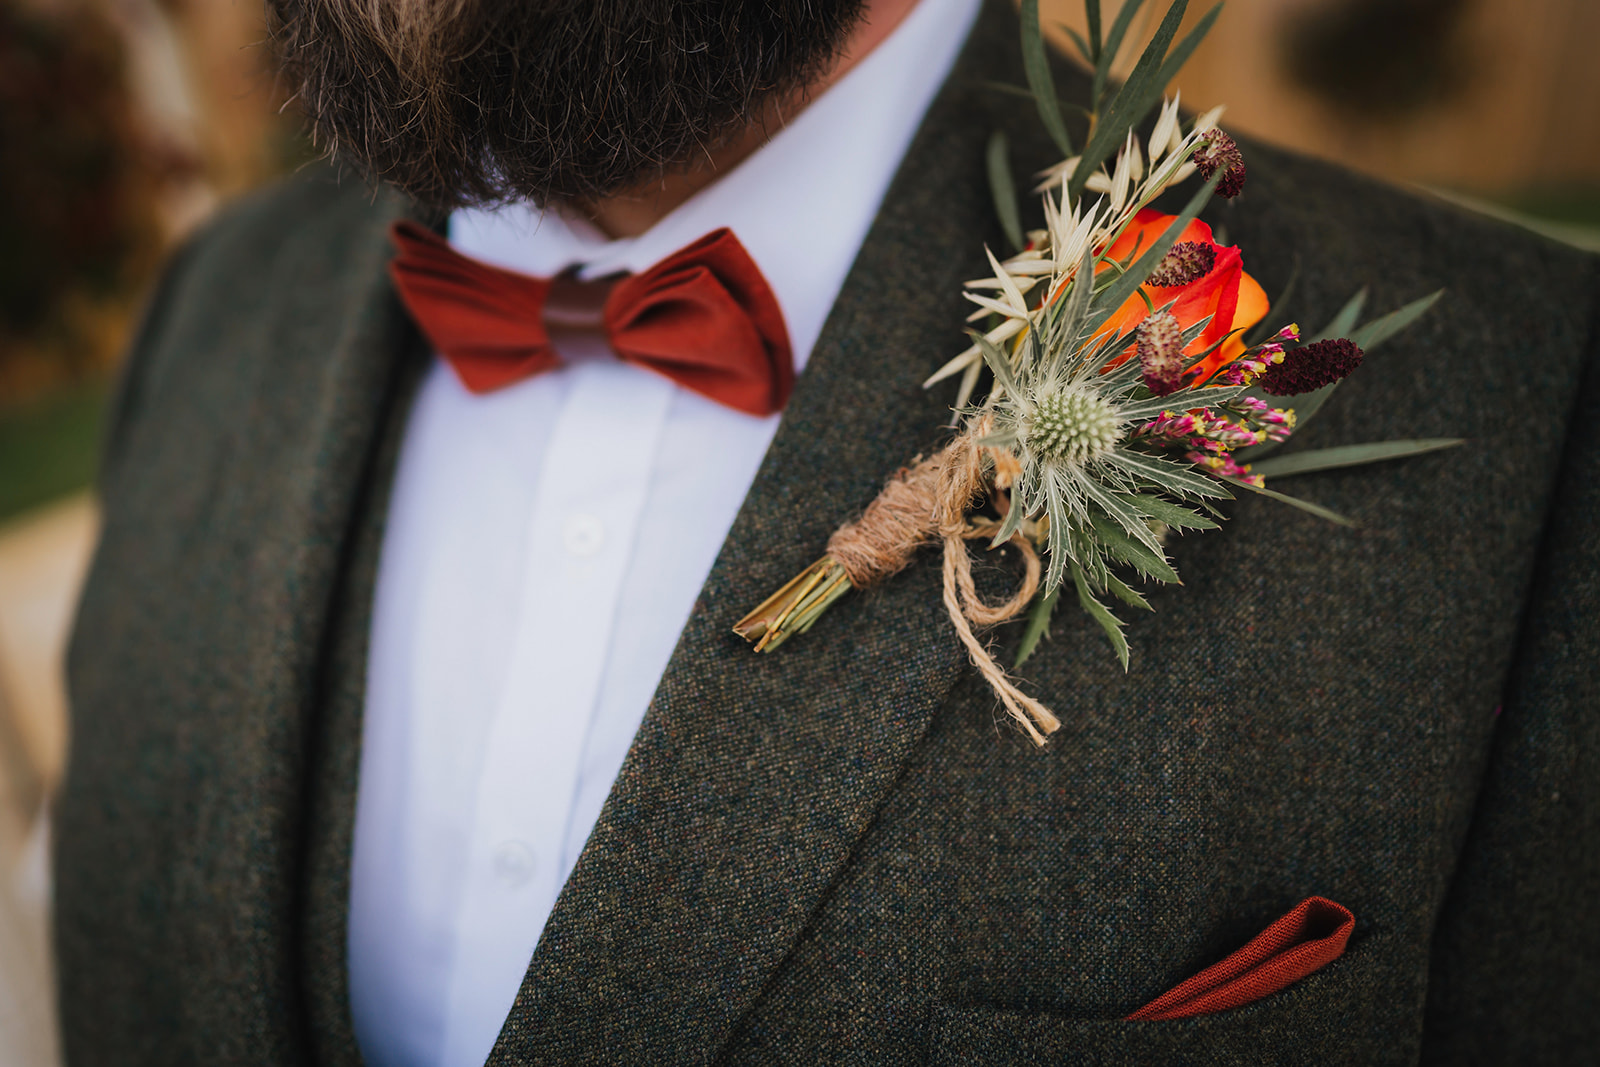 the groom's buttonhole, pocket square and bow tie